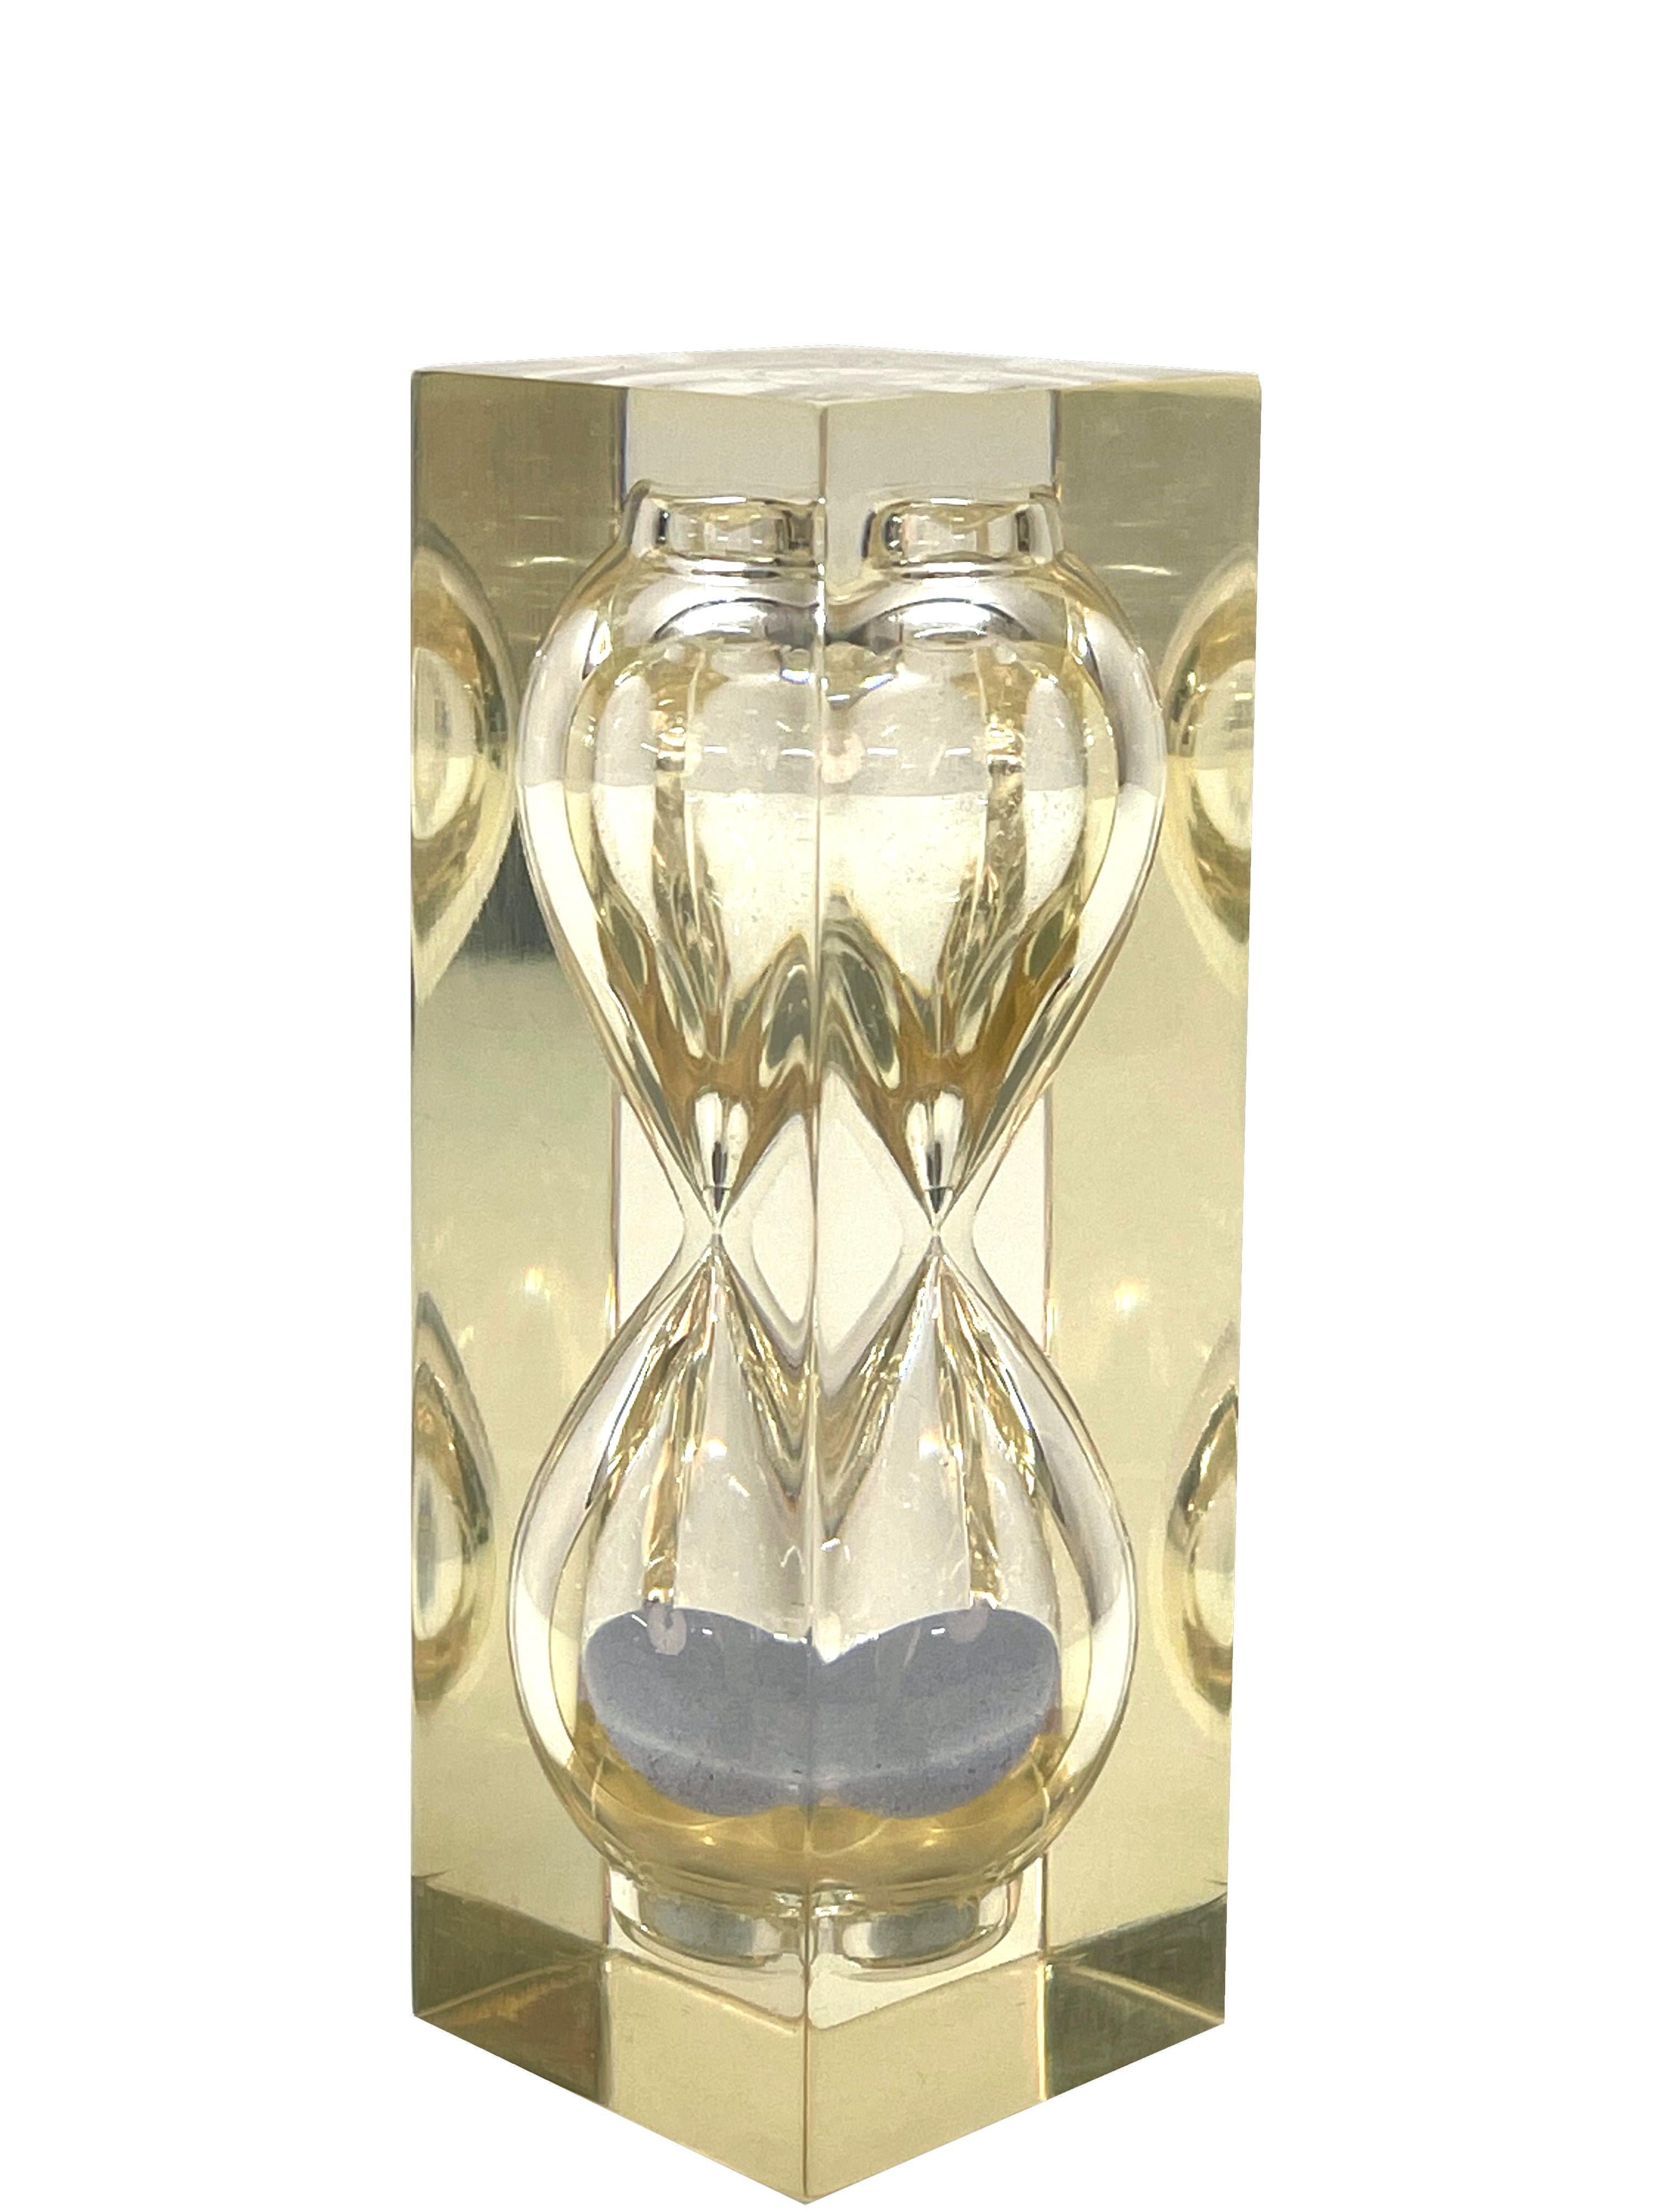 Midcentury Lucite Hourglass Sand Timer Sculpture After Charles Hollis Jones 1970 For Sale 1